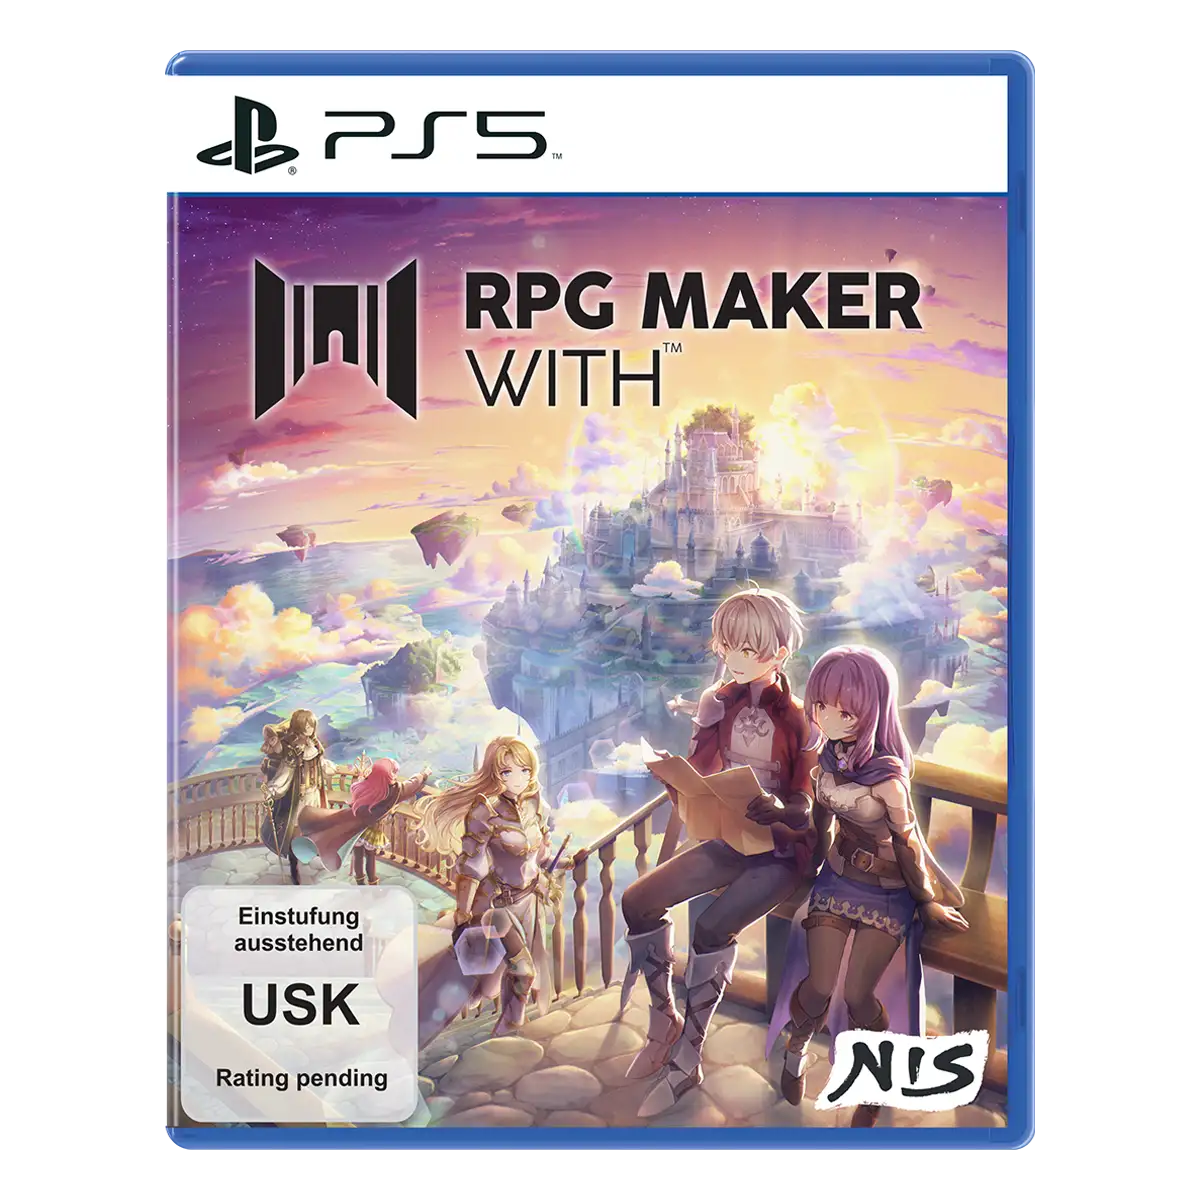 RPG MAKER WITH (PS5) Cover